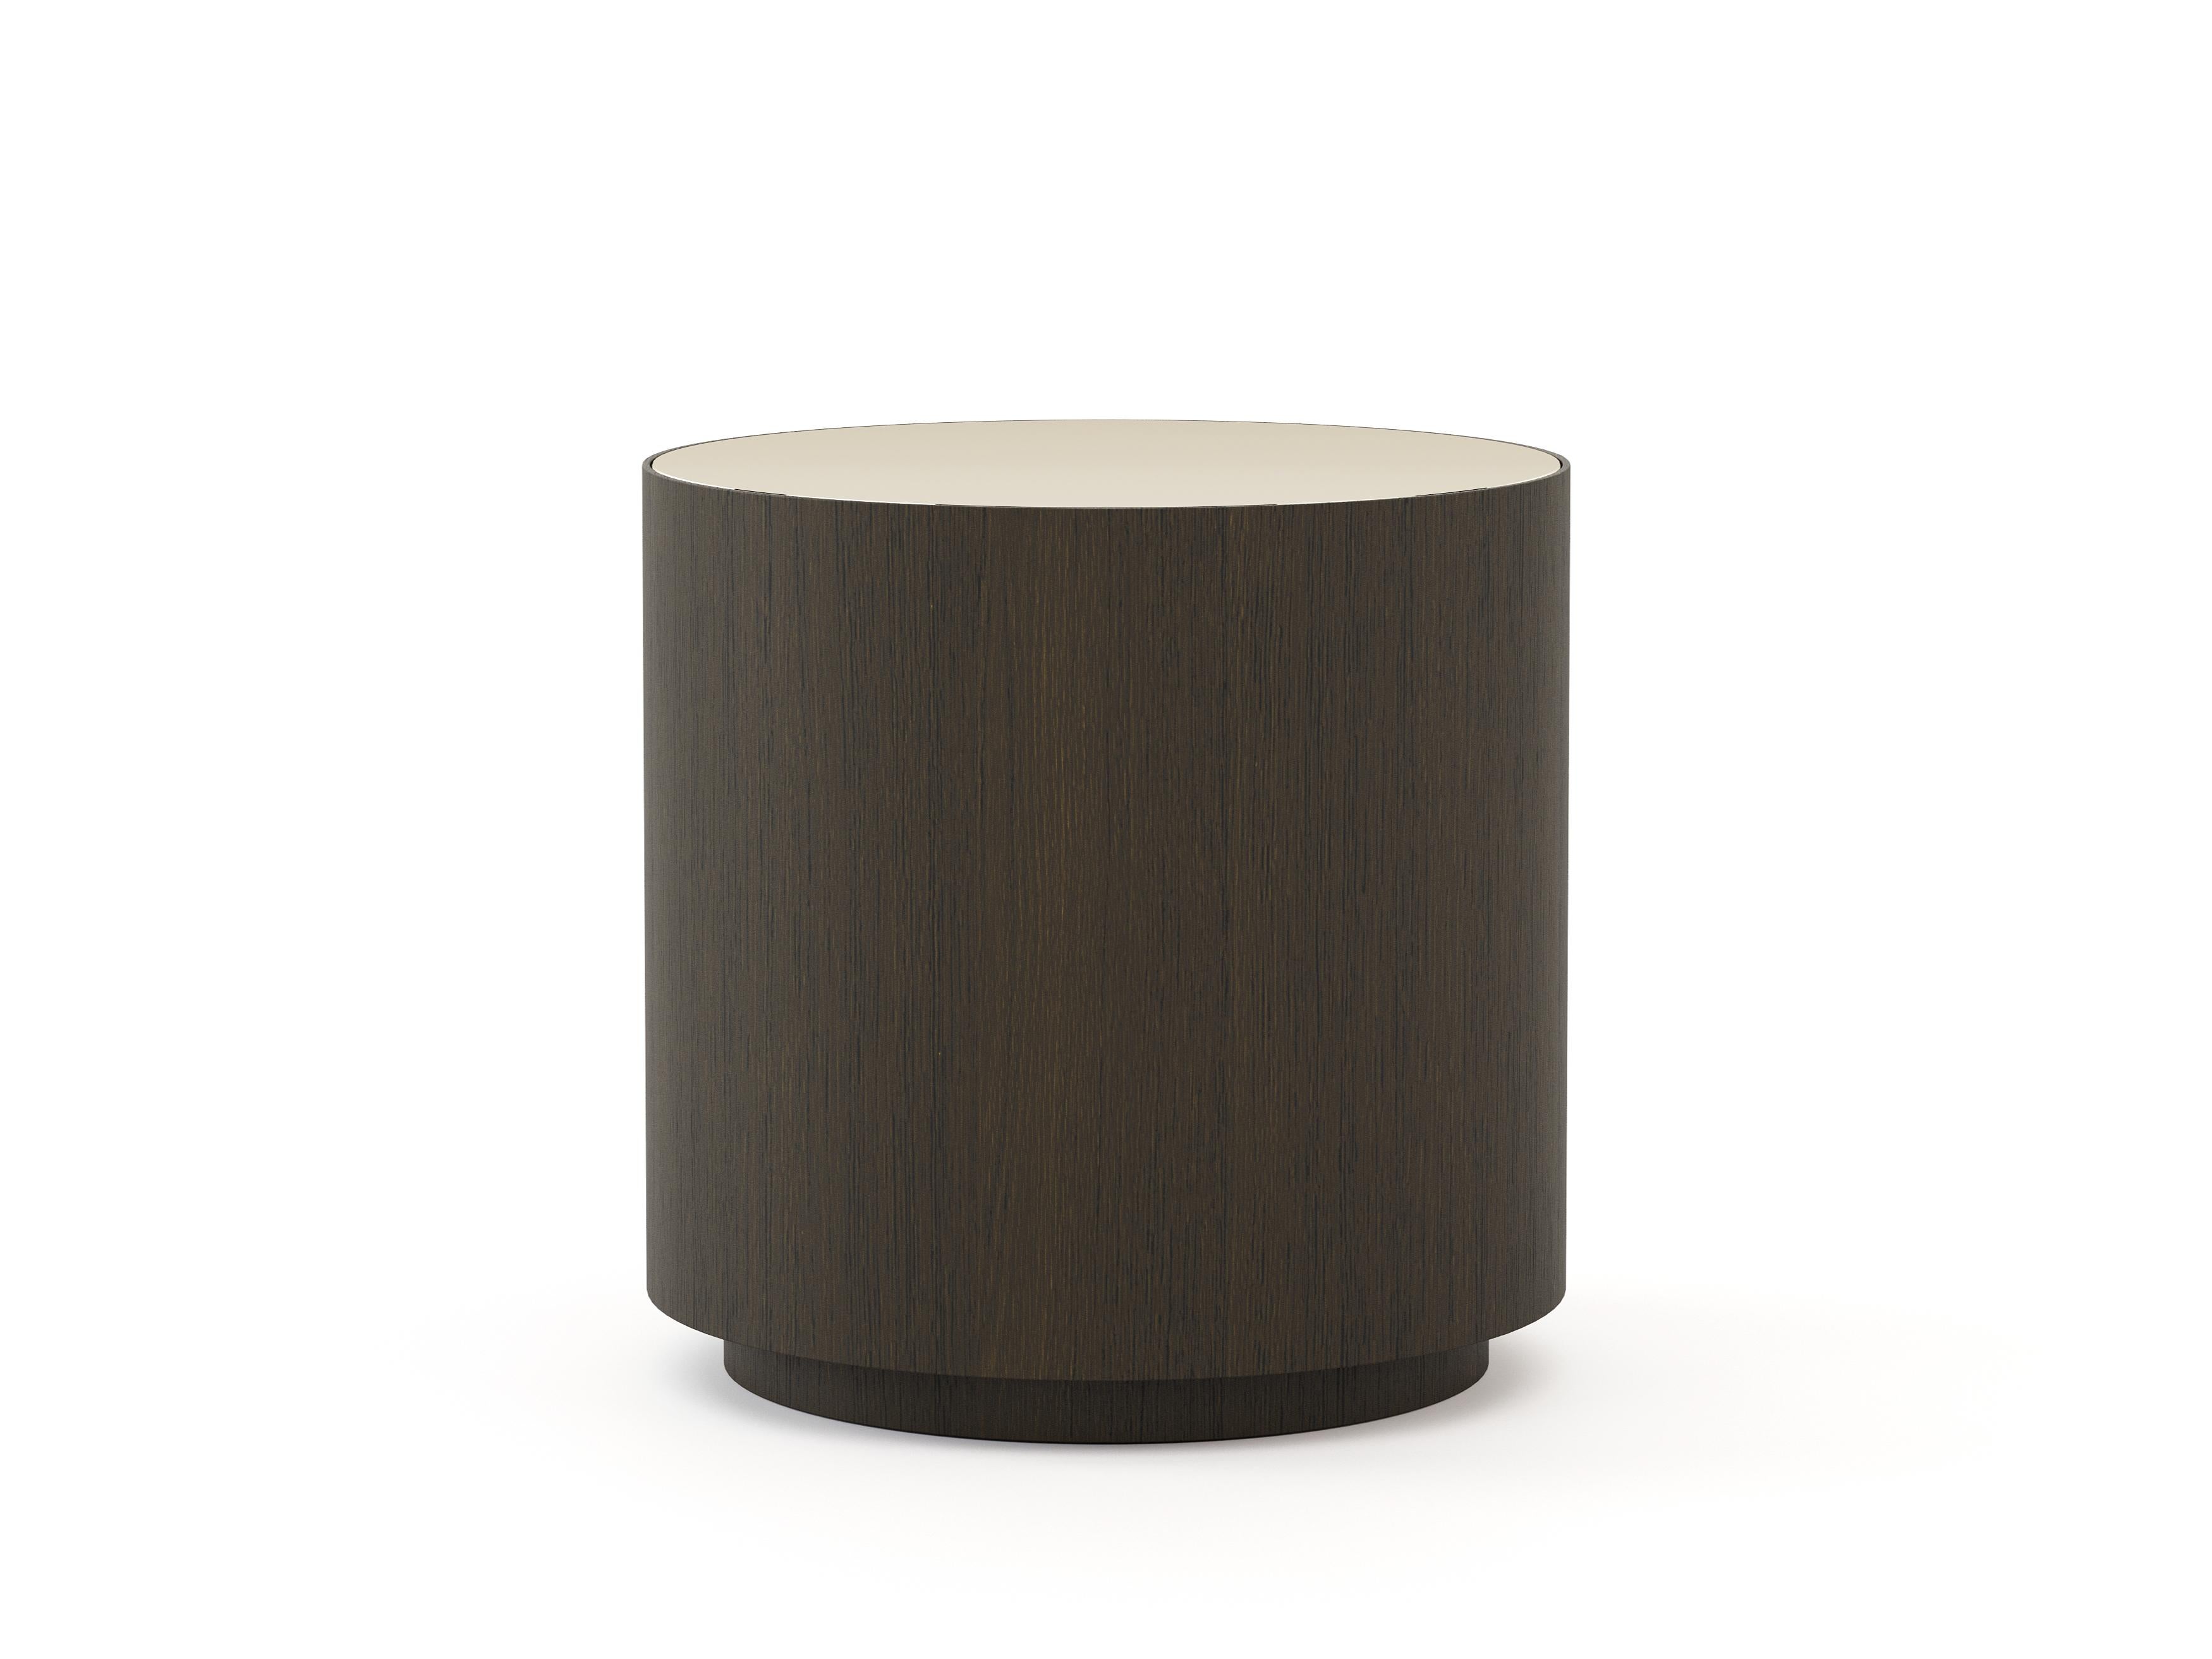 Portuguese Modern Set Drum Side Tables made with wood, lacquer and glass, Handmade For Sale